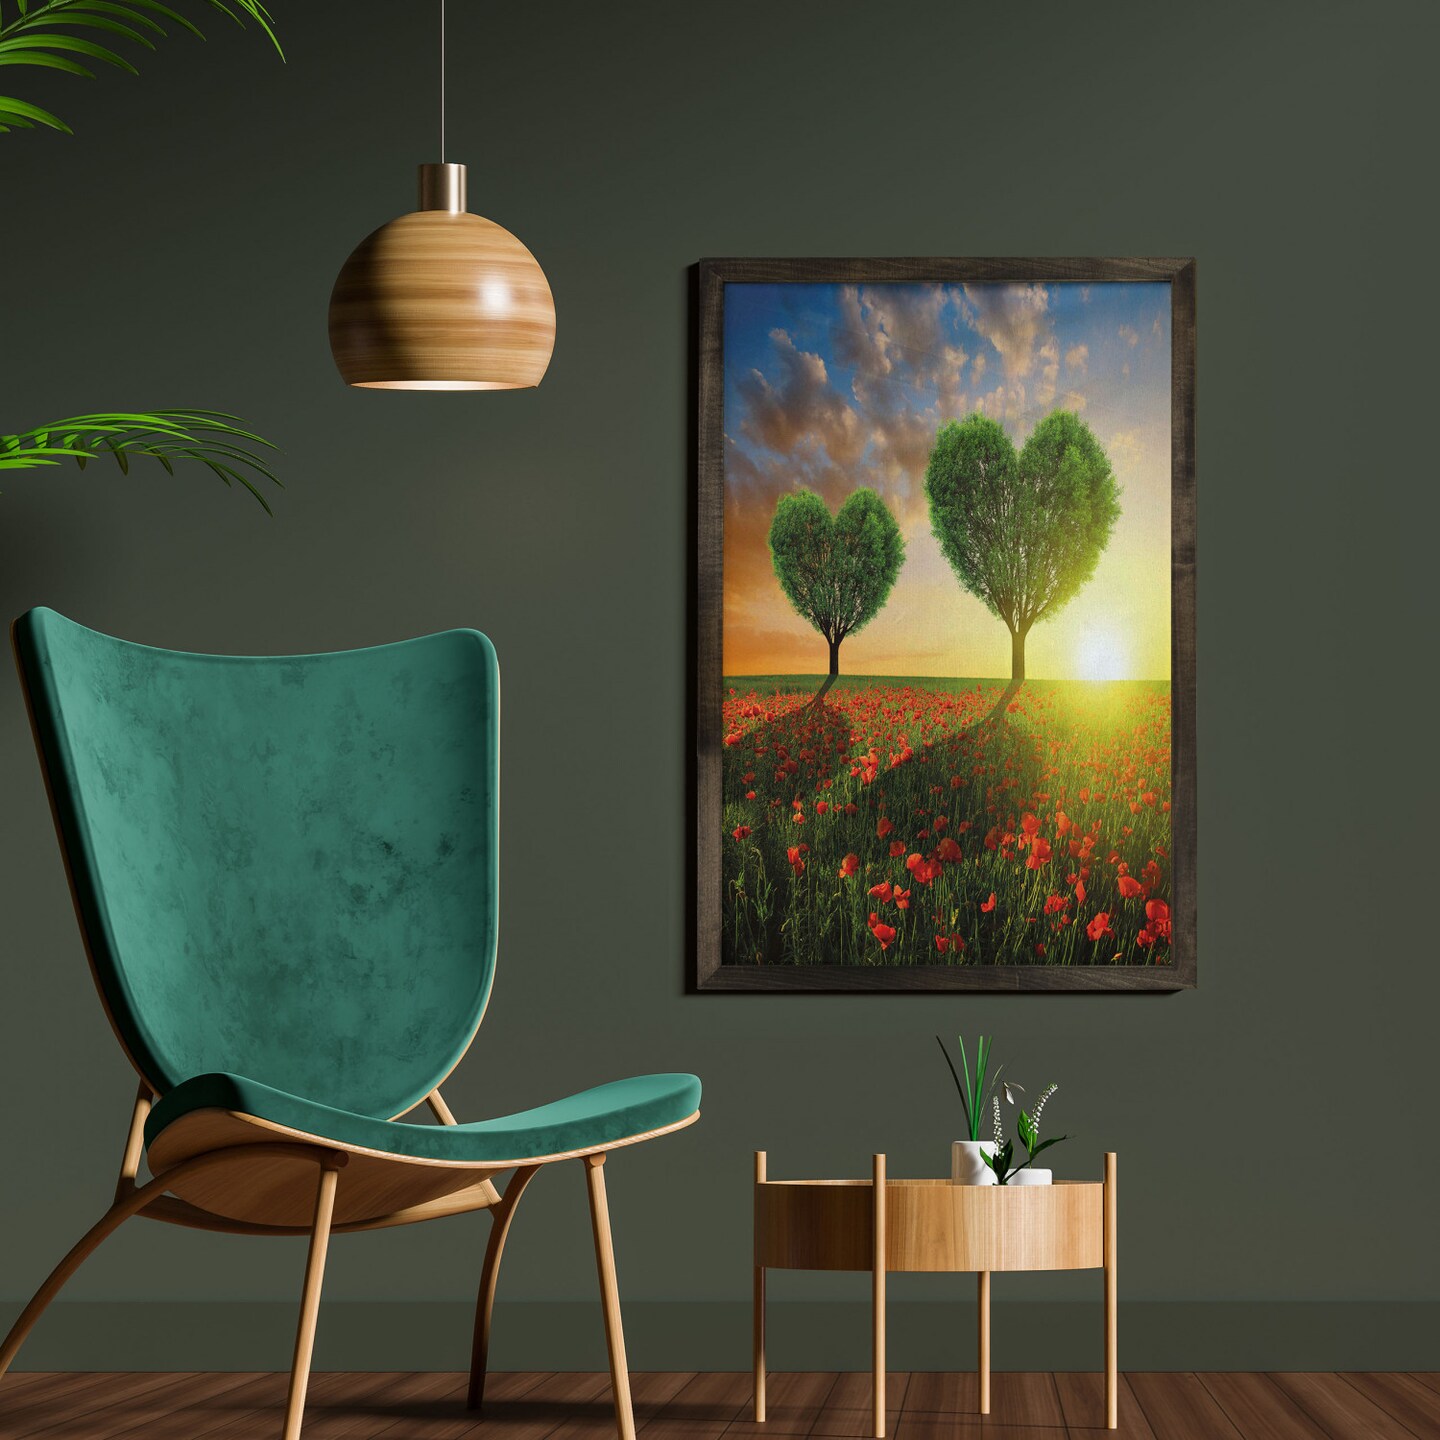 Ambesonne Valentine&#x27;s Day Framed Wall Art, Poppy Field Heart Shaped Trees Sunset Cloudy Sky Rural Romantic Meadow, Fabric Poster with Carbonized Tone Wood Frame Home Decor, 23&#x22; x 35&#x22;, Green Red Blue